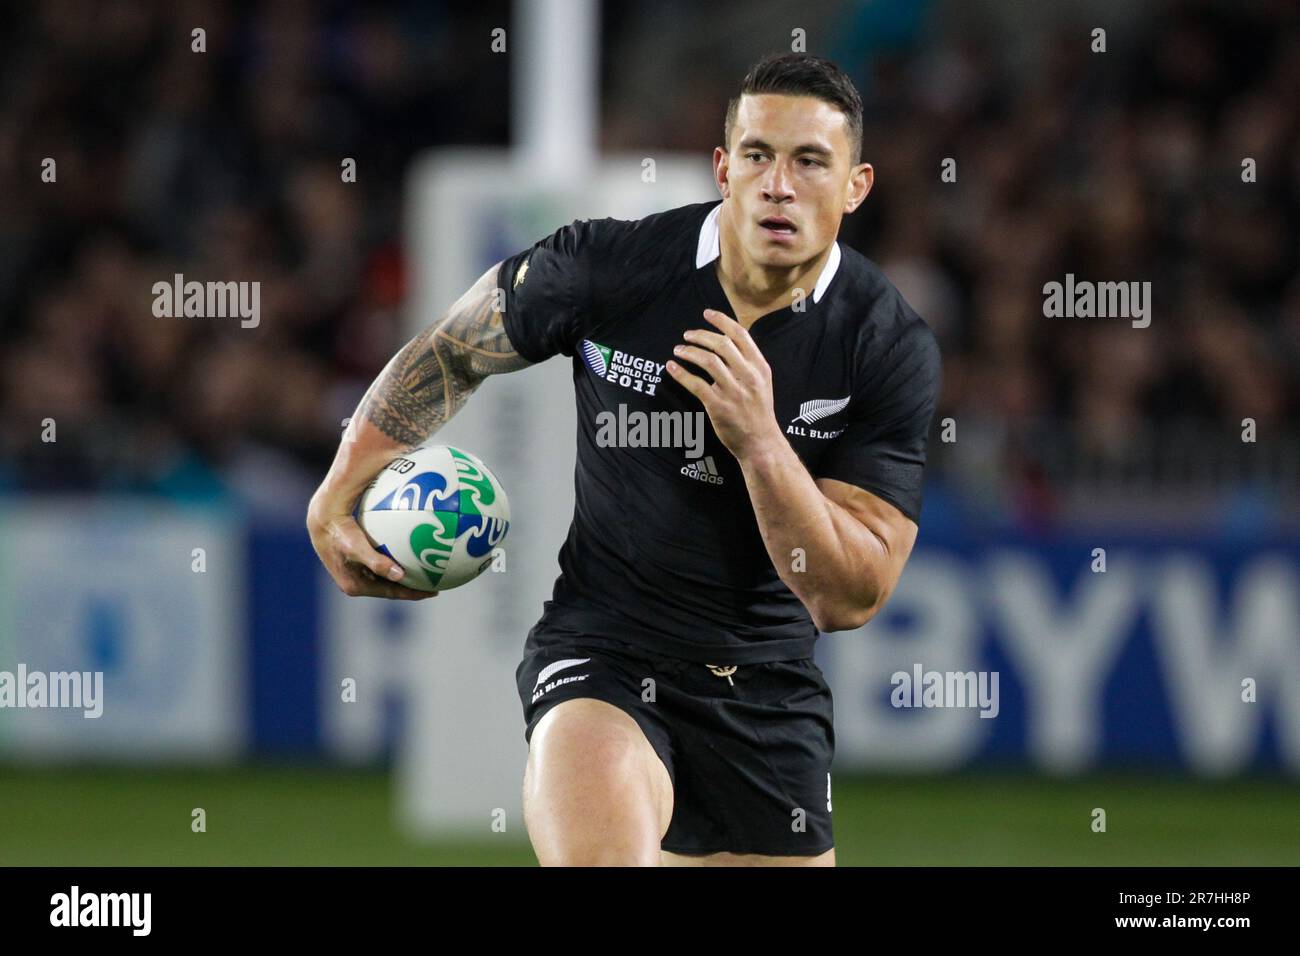 Sonny Bill Williams makes a run against Argentina during quarter-final 4 match of the Rugby World Cup 2011, Eden Park, Auckland, New Zealand, Sunday, October 09, 2011. Stock Photo